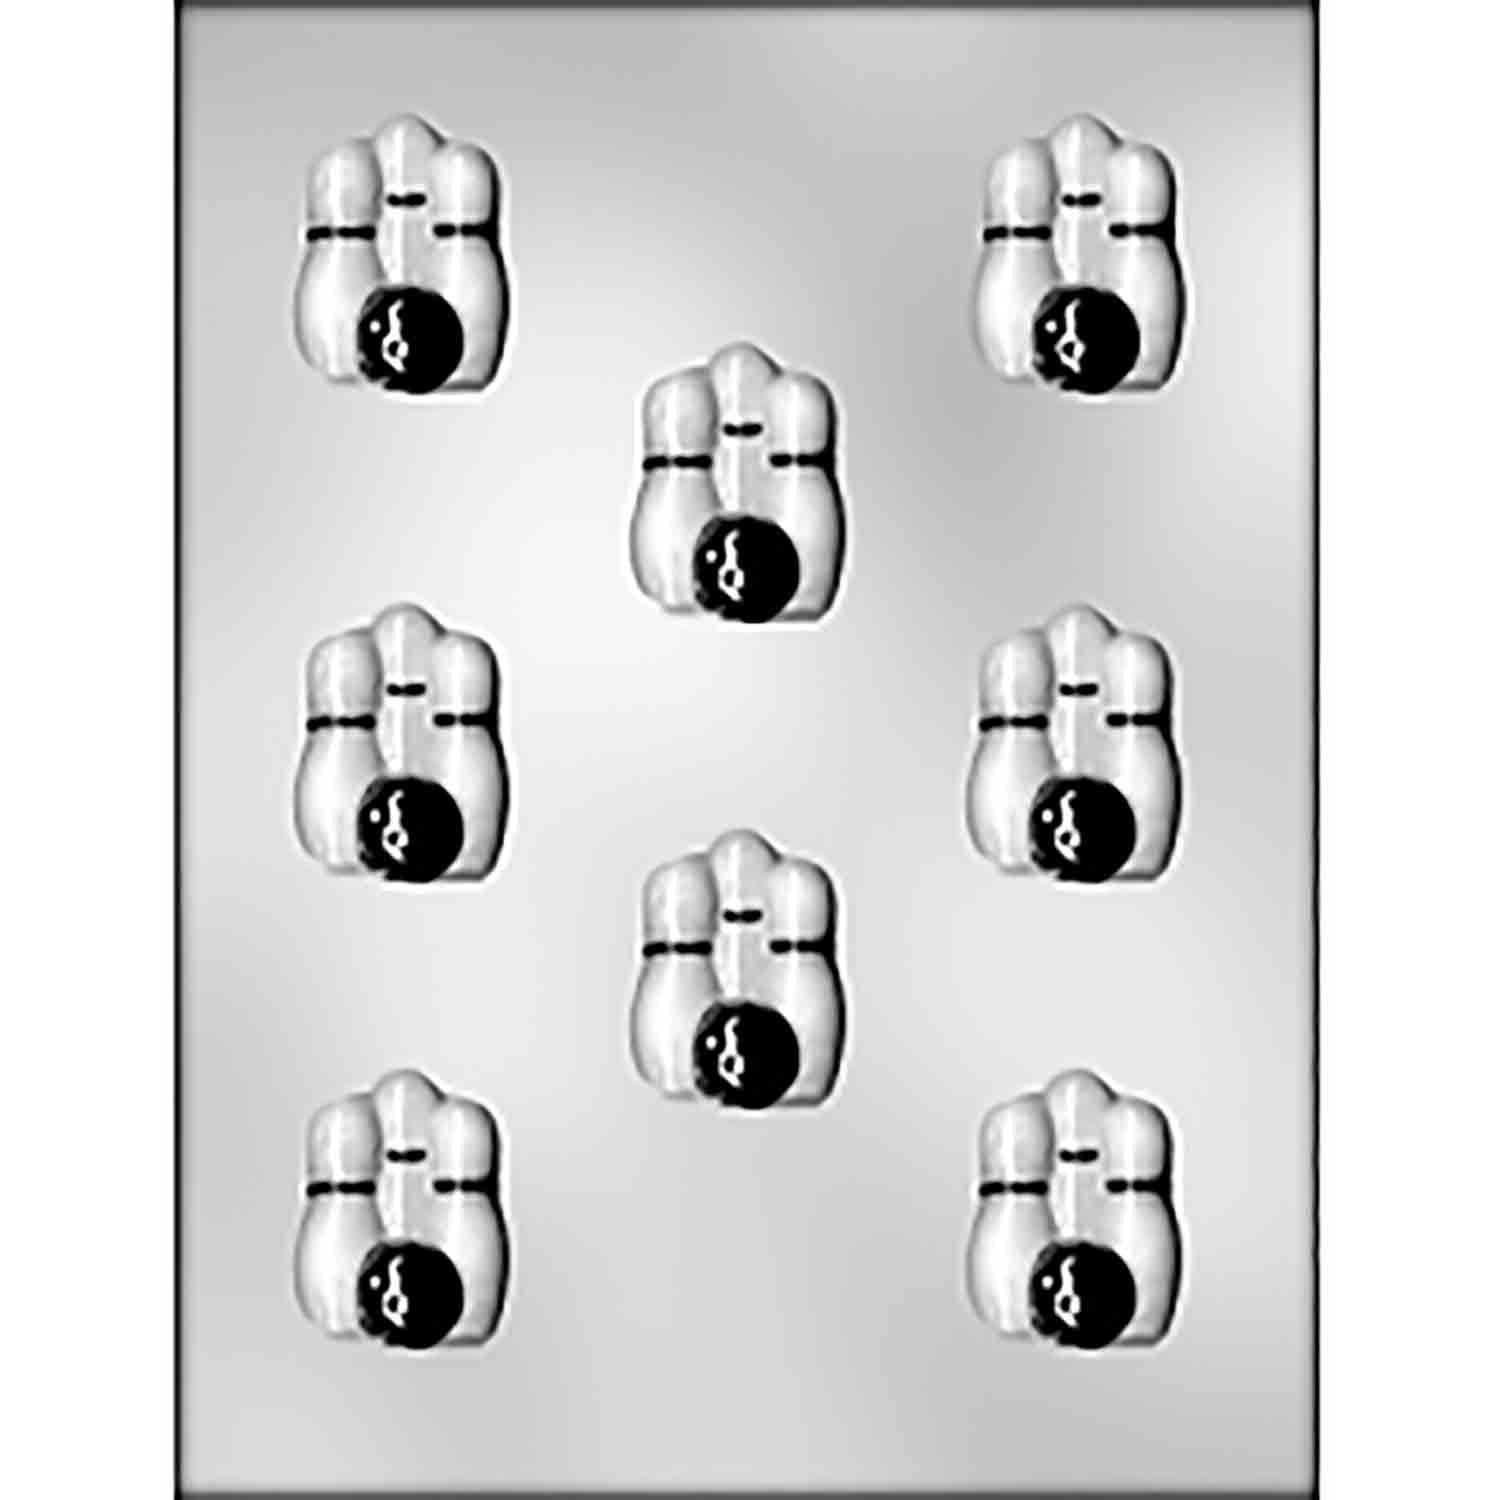 Bowling Pins & Ball Chocolate Candy Mold